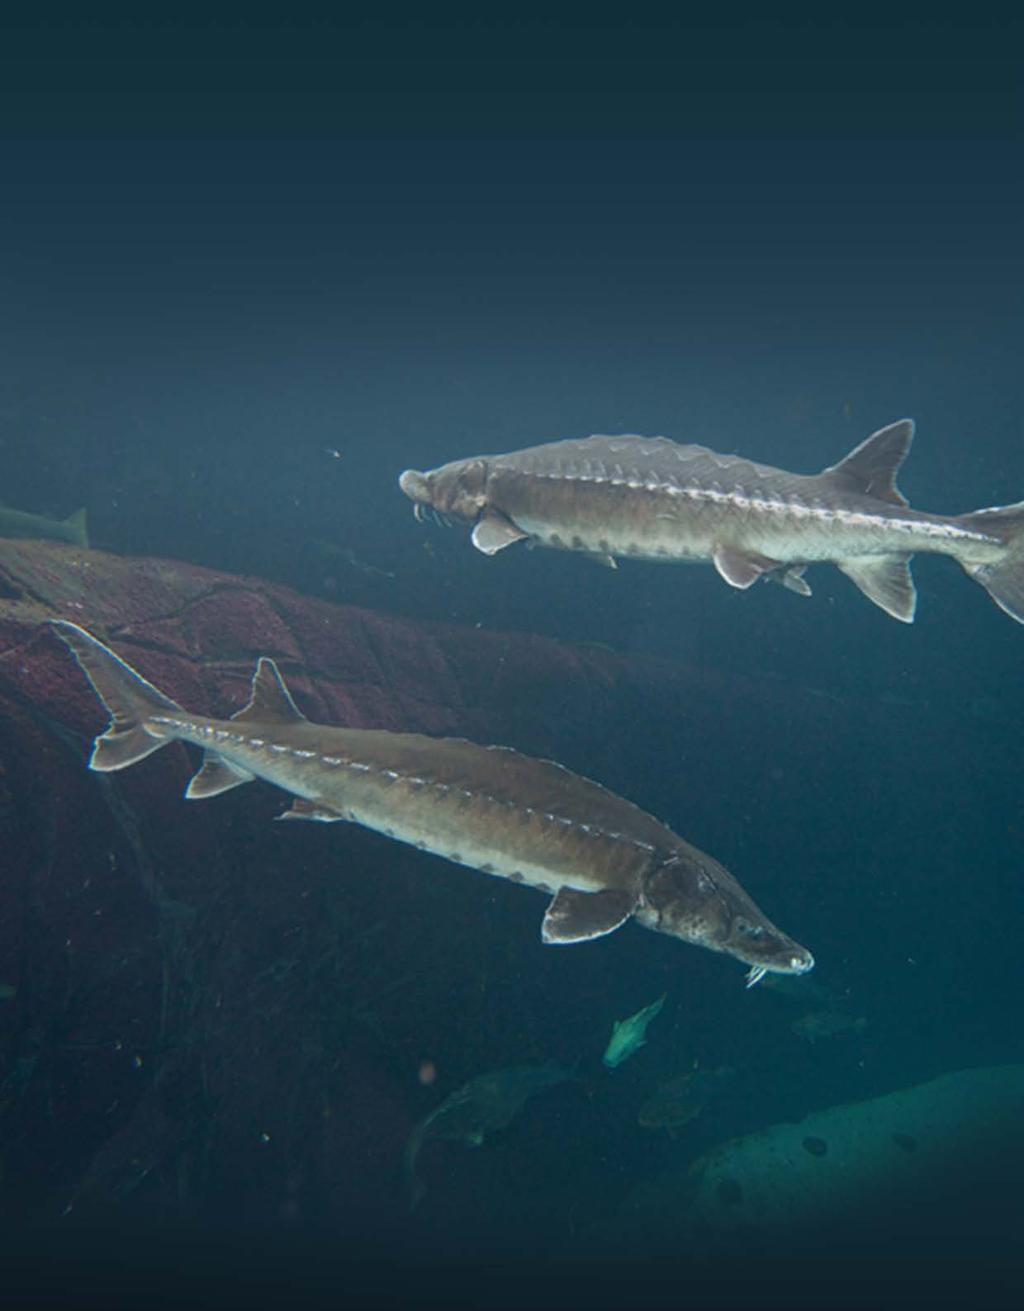 WHY were the St. Lawrence and Maritimes populations of Atlantic Sturgeon assessed as threatened?